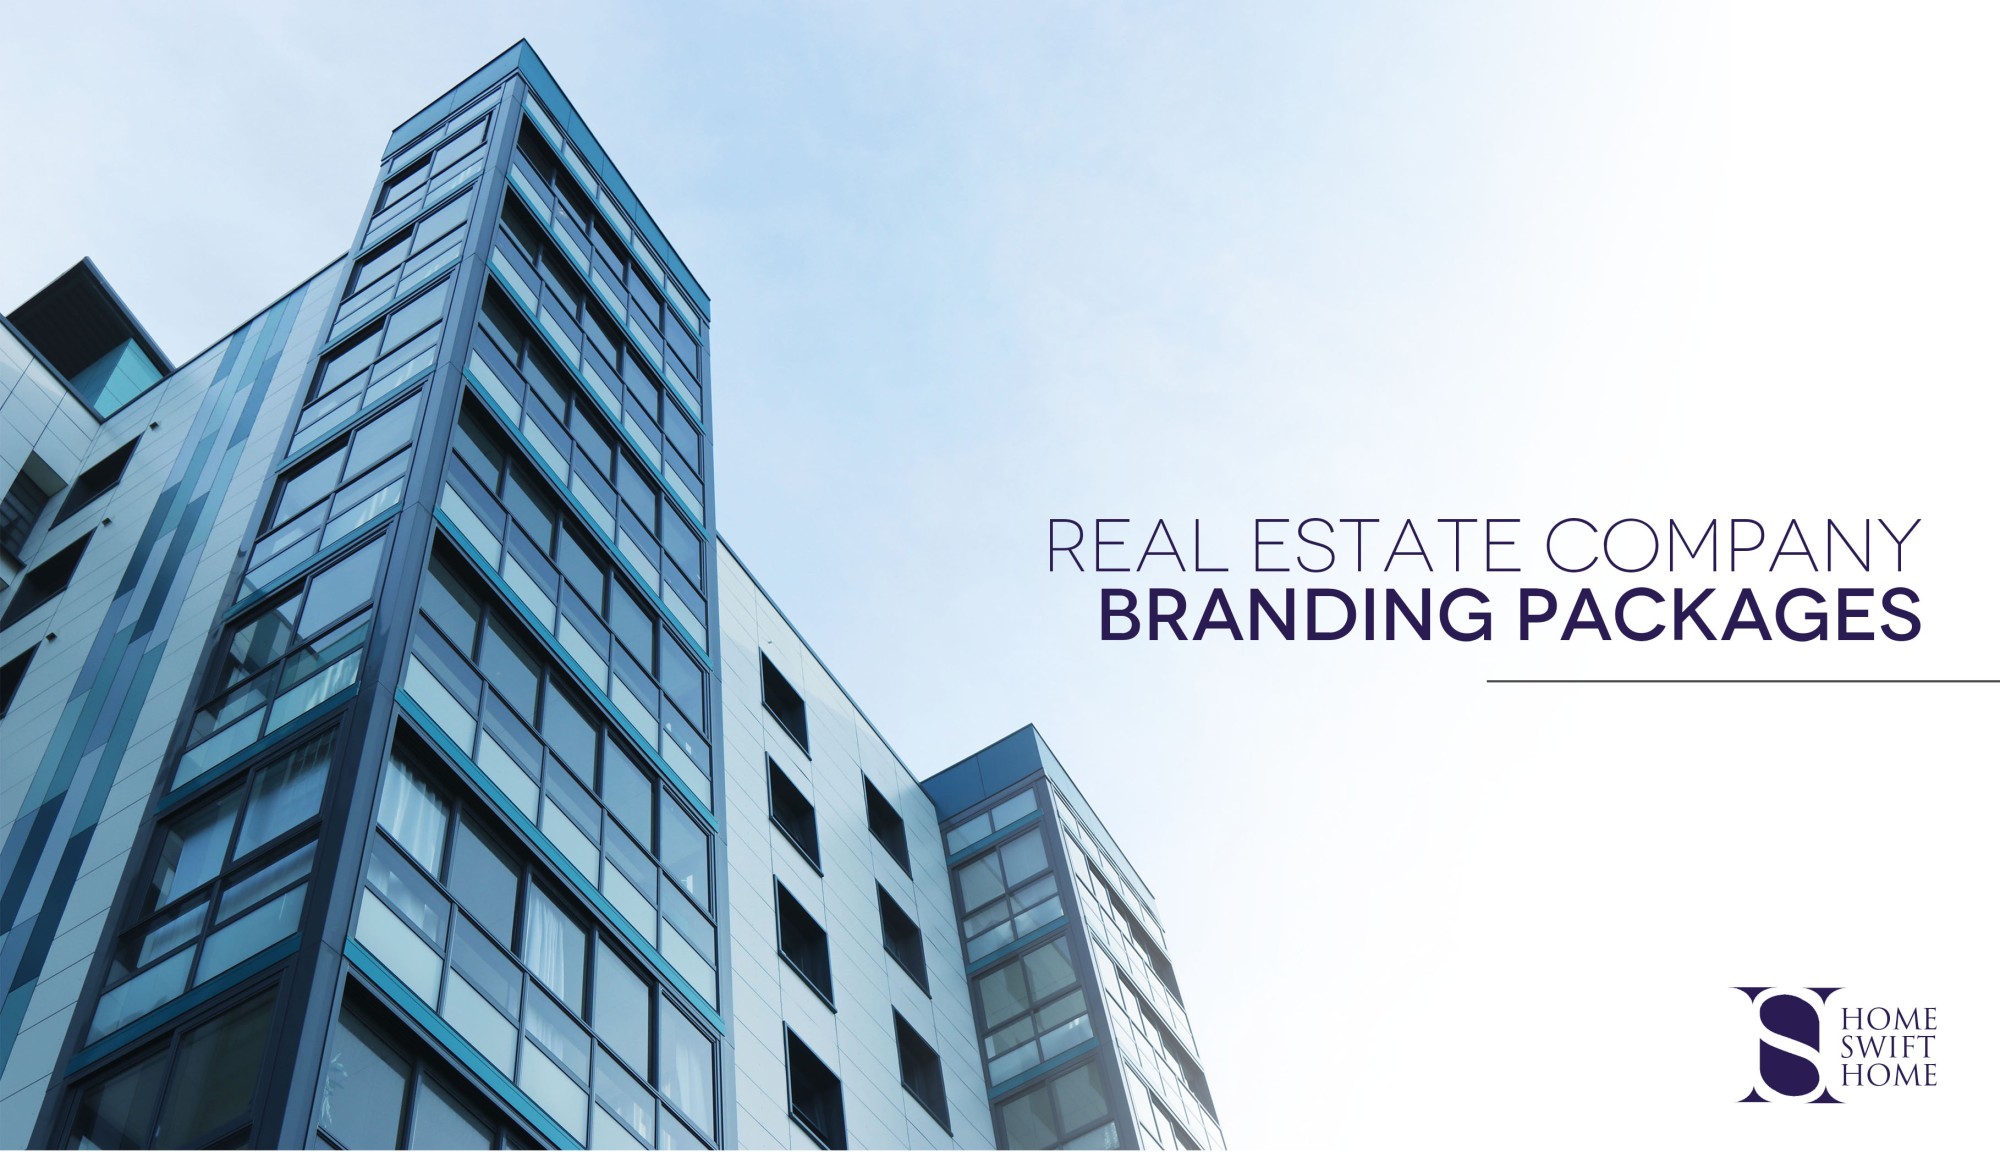 Real Estate Company Branding Packages â€“ Home Swift Home